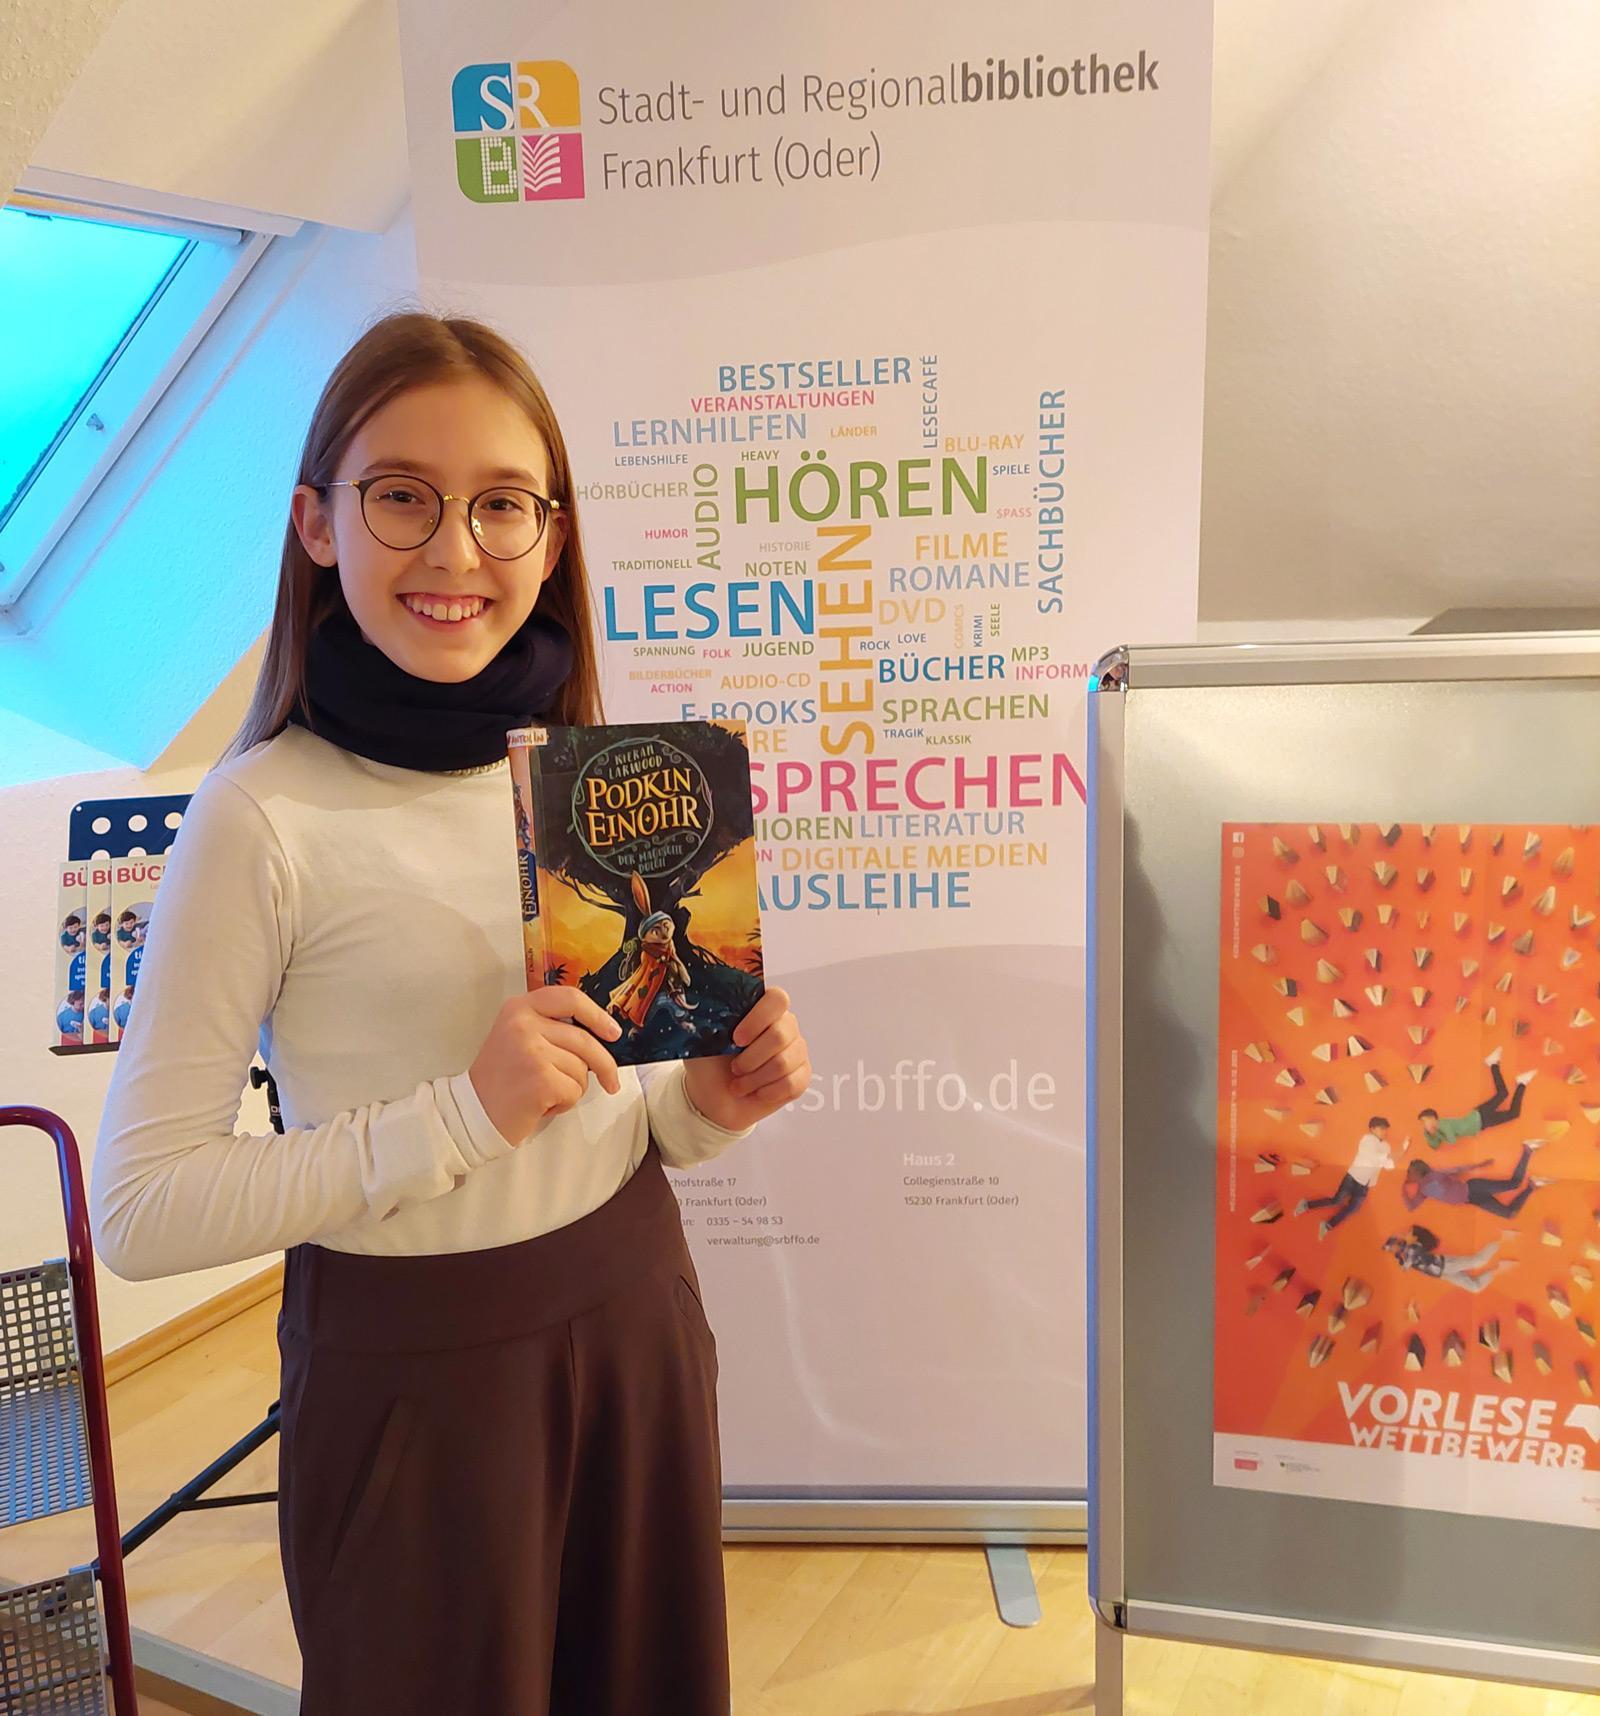 Johanna Schumann as winner of the reading competition © City and Regional Library Frankfurt (Oder)